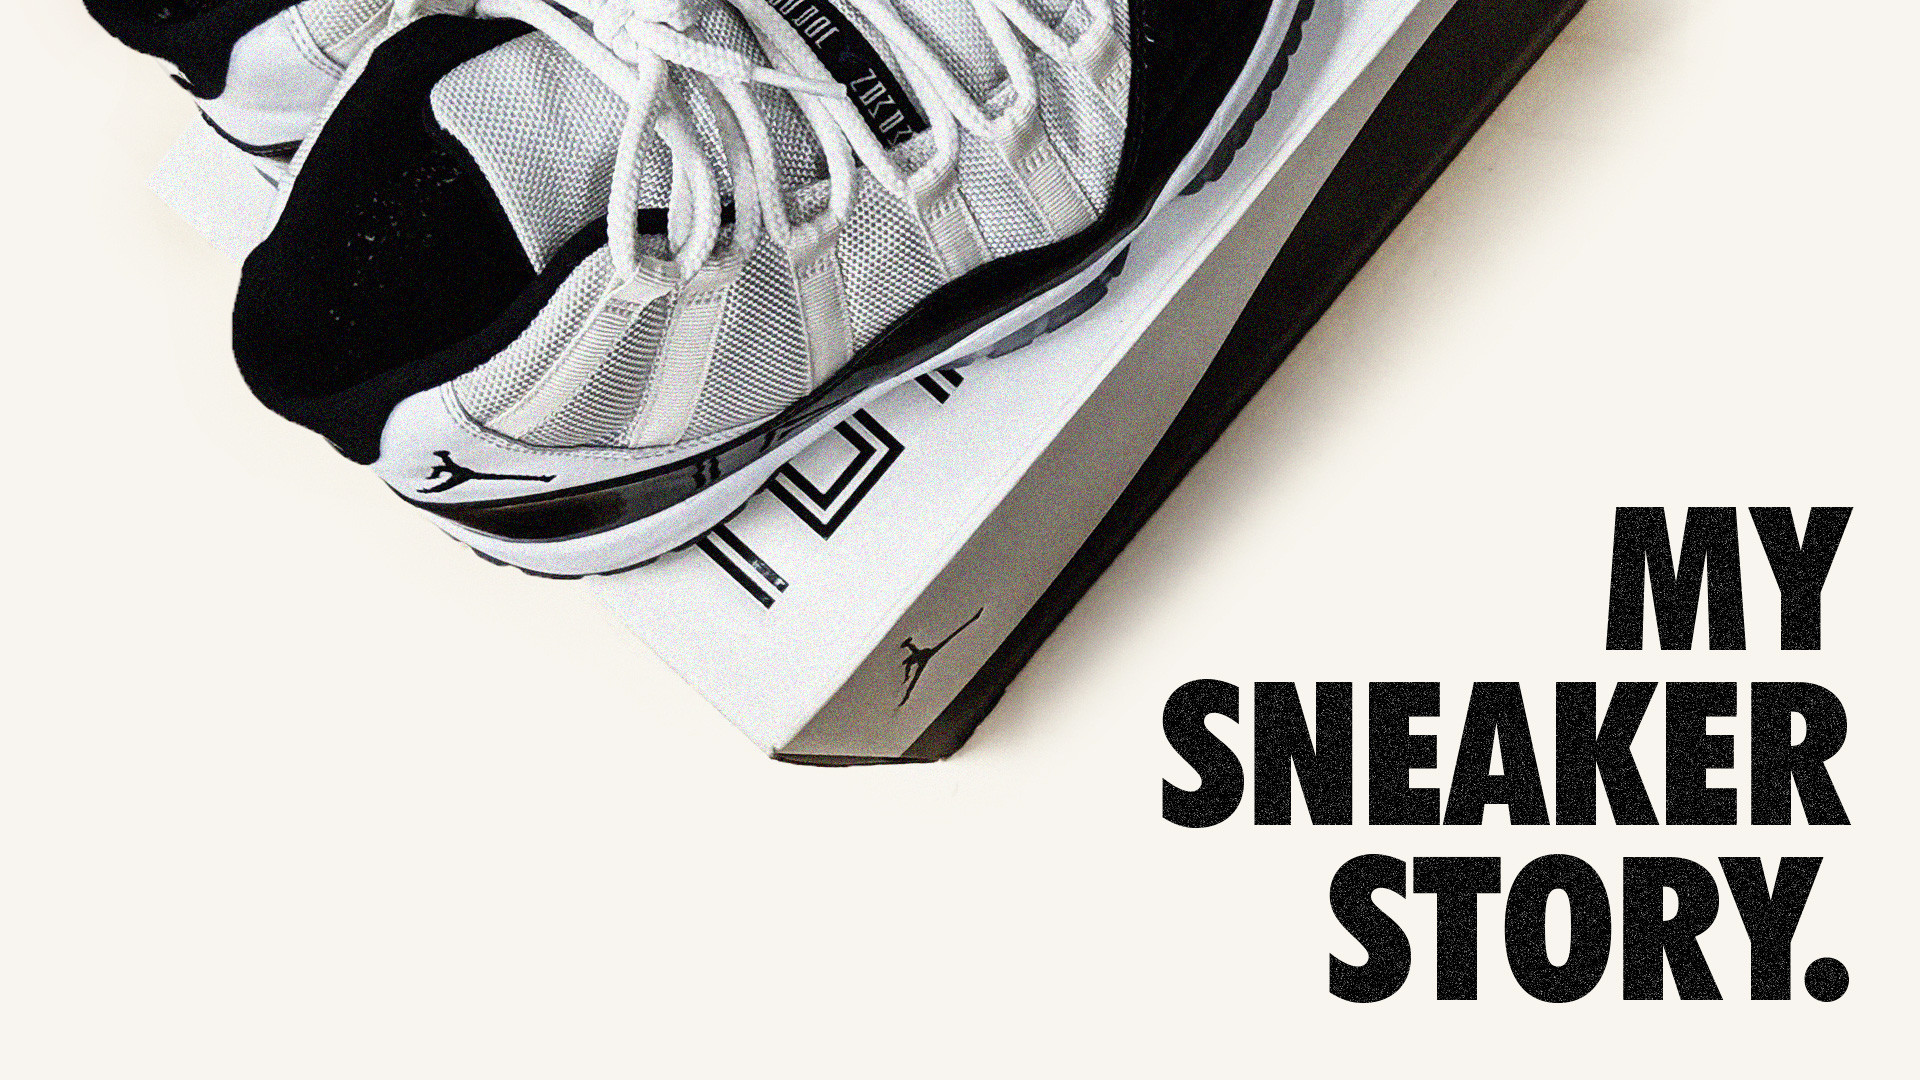 The sneaker story